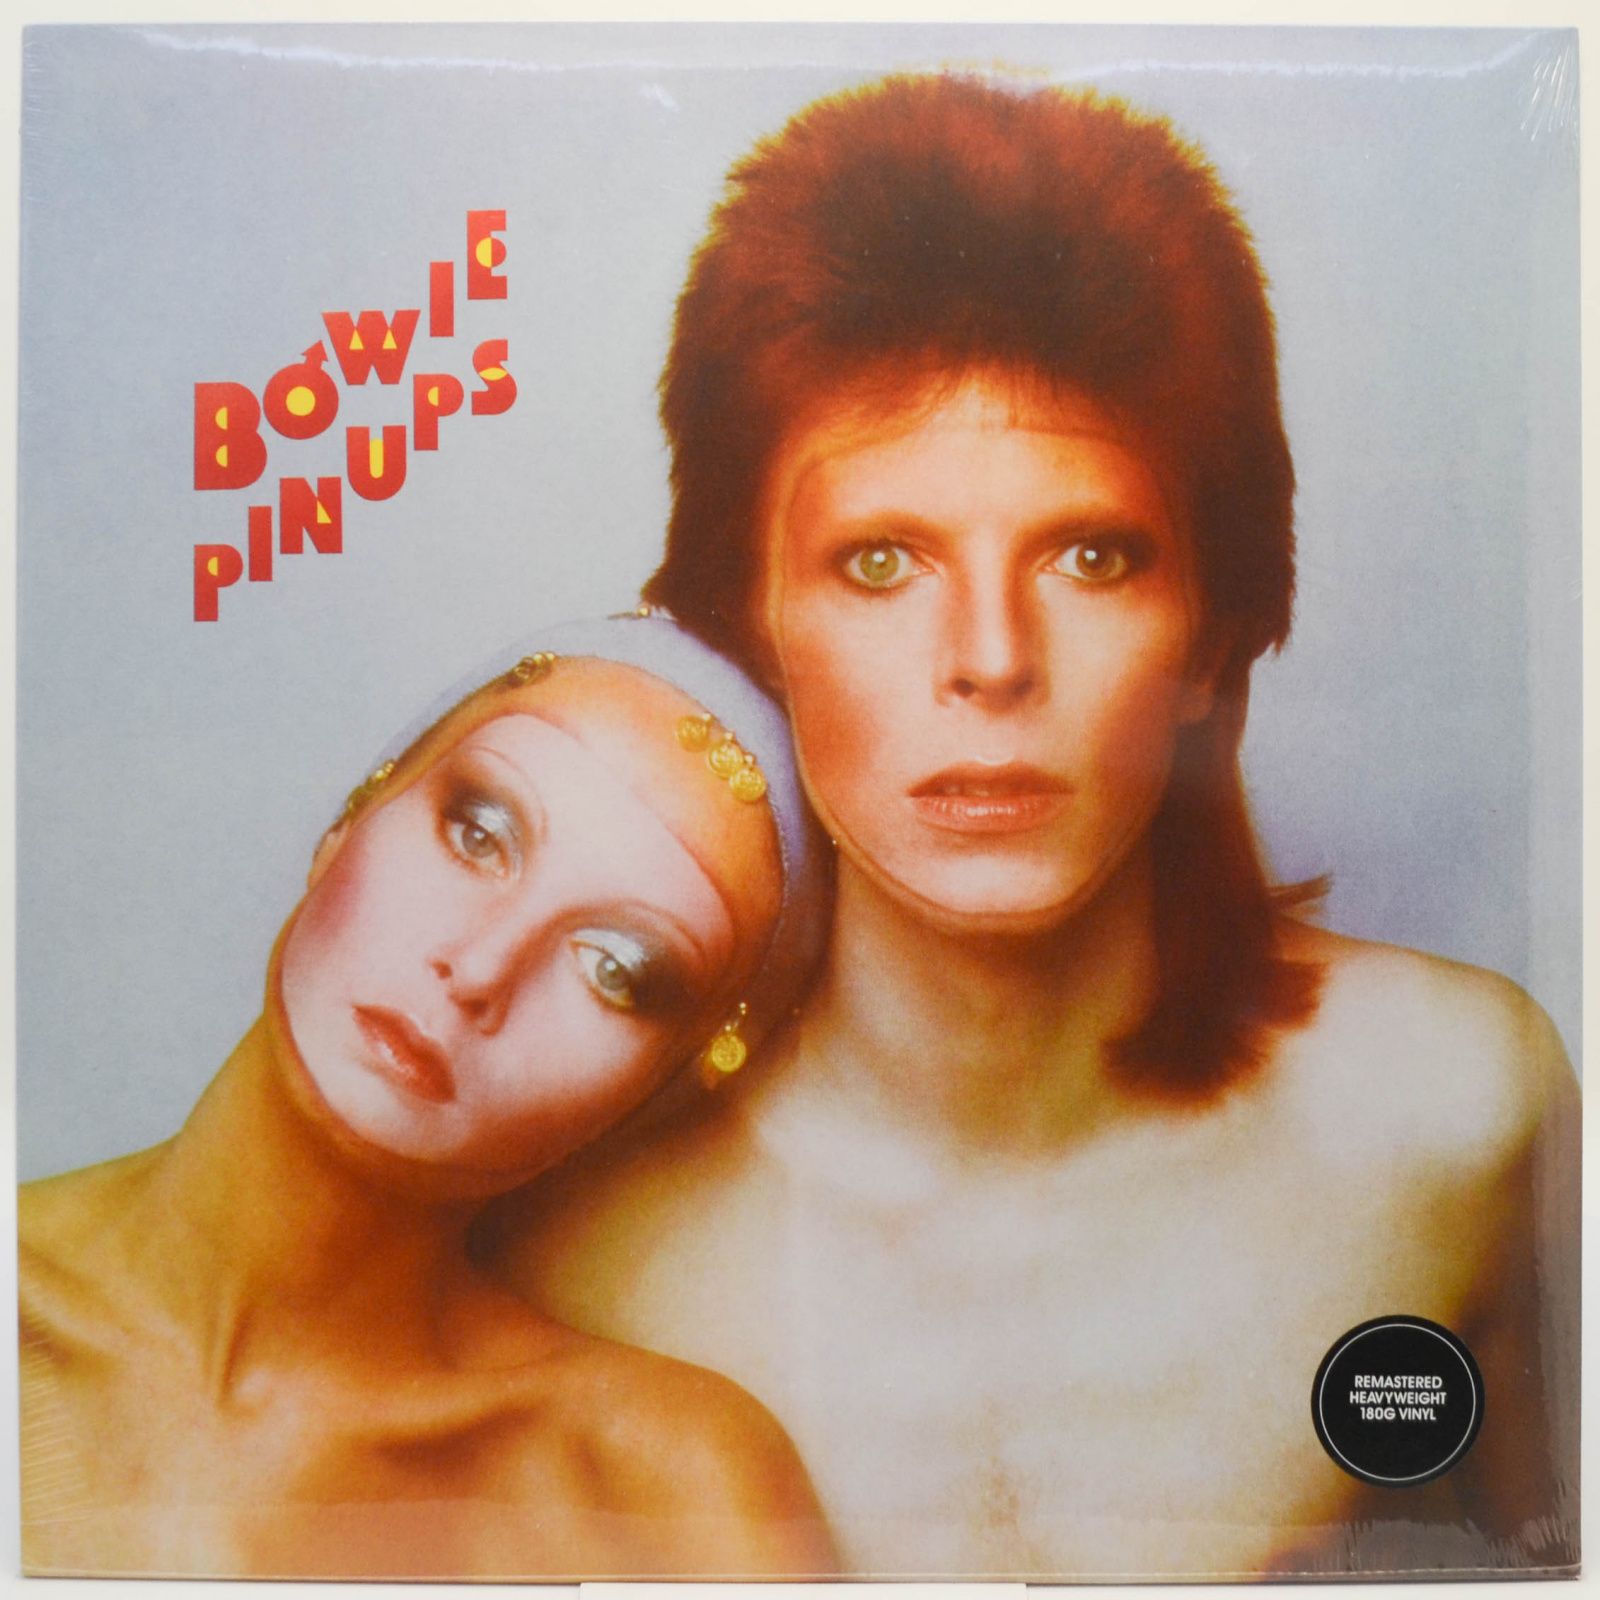 Bowie — Pin Ups, 2016